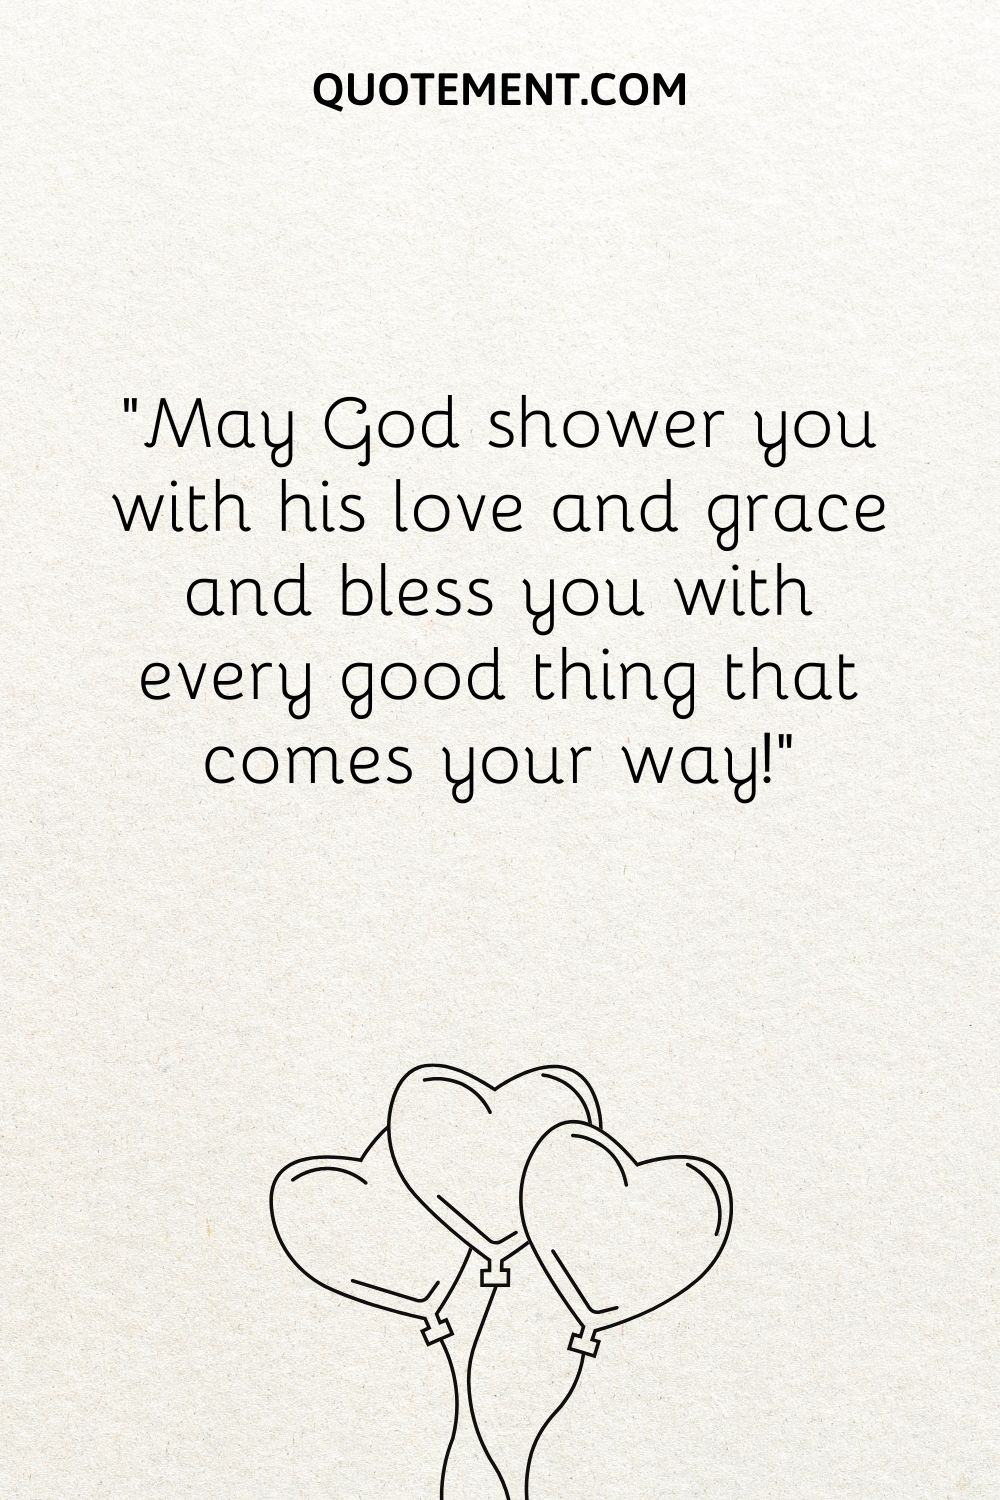 May God shower you with his love and grace and bless you with every good thing that comes your way!